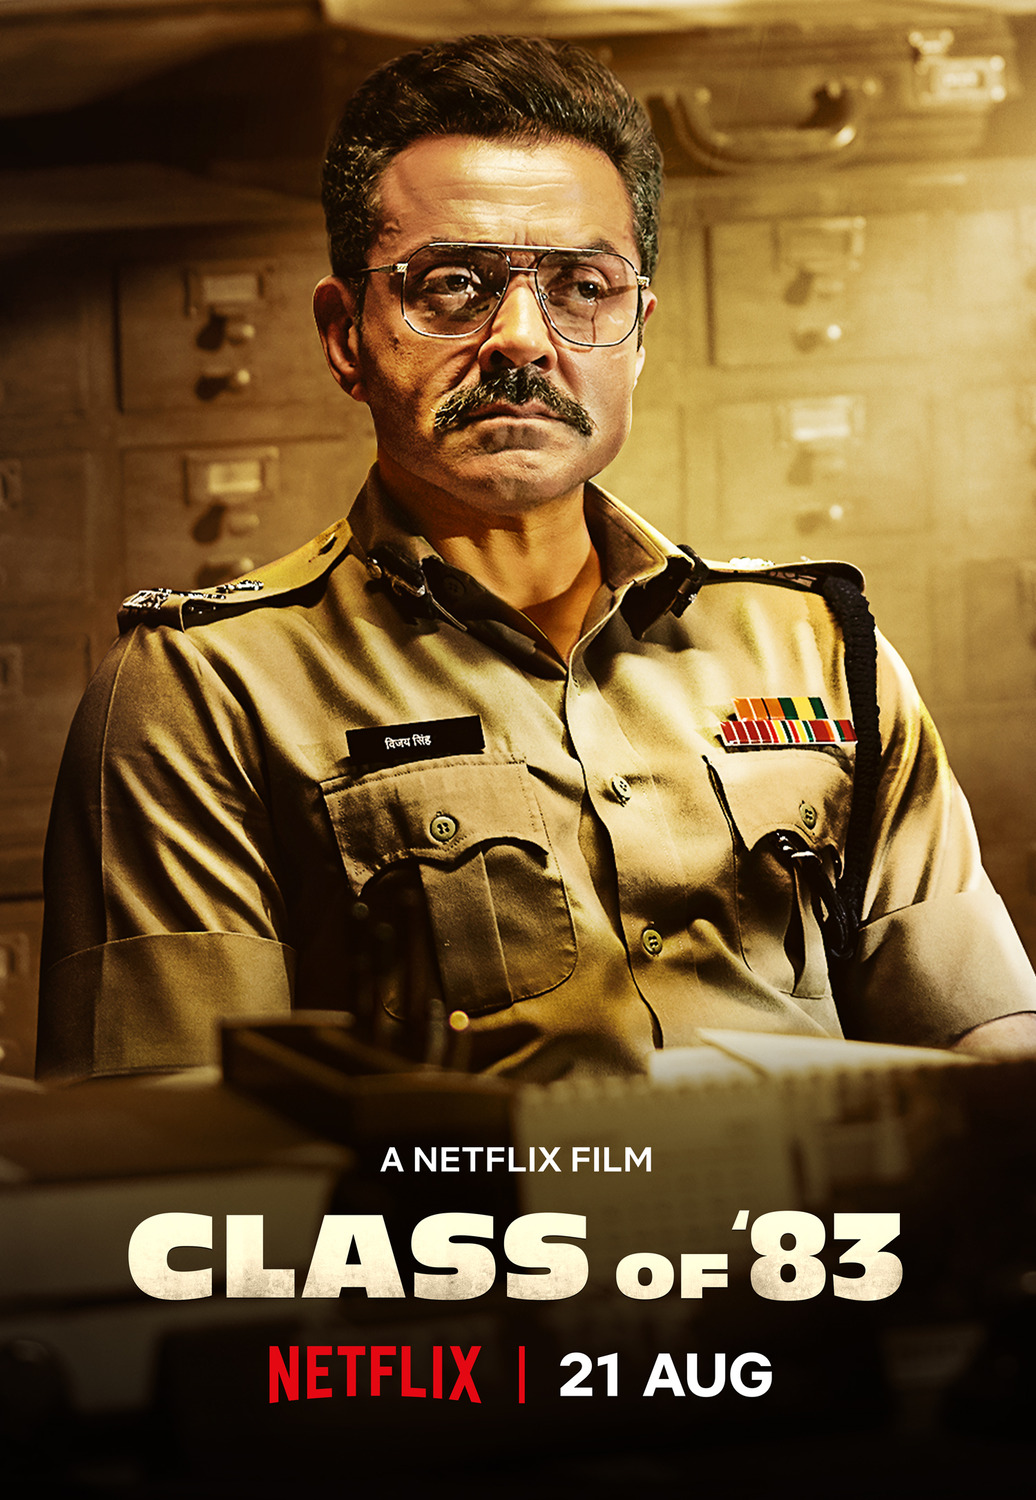 Extra Large TV Poster Image for Class of 83 